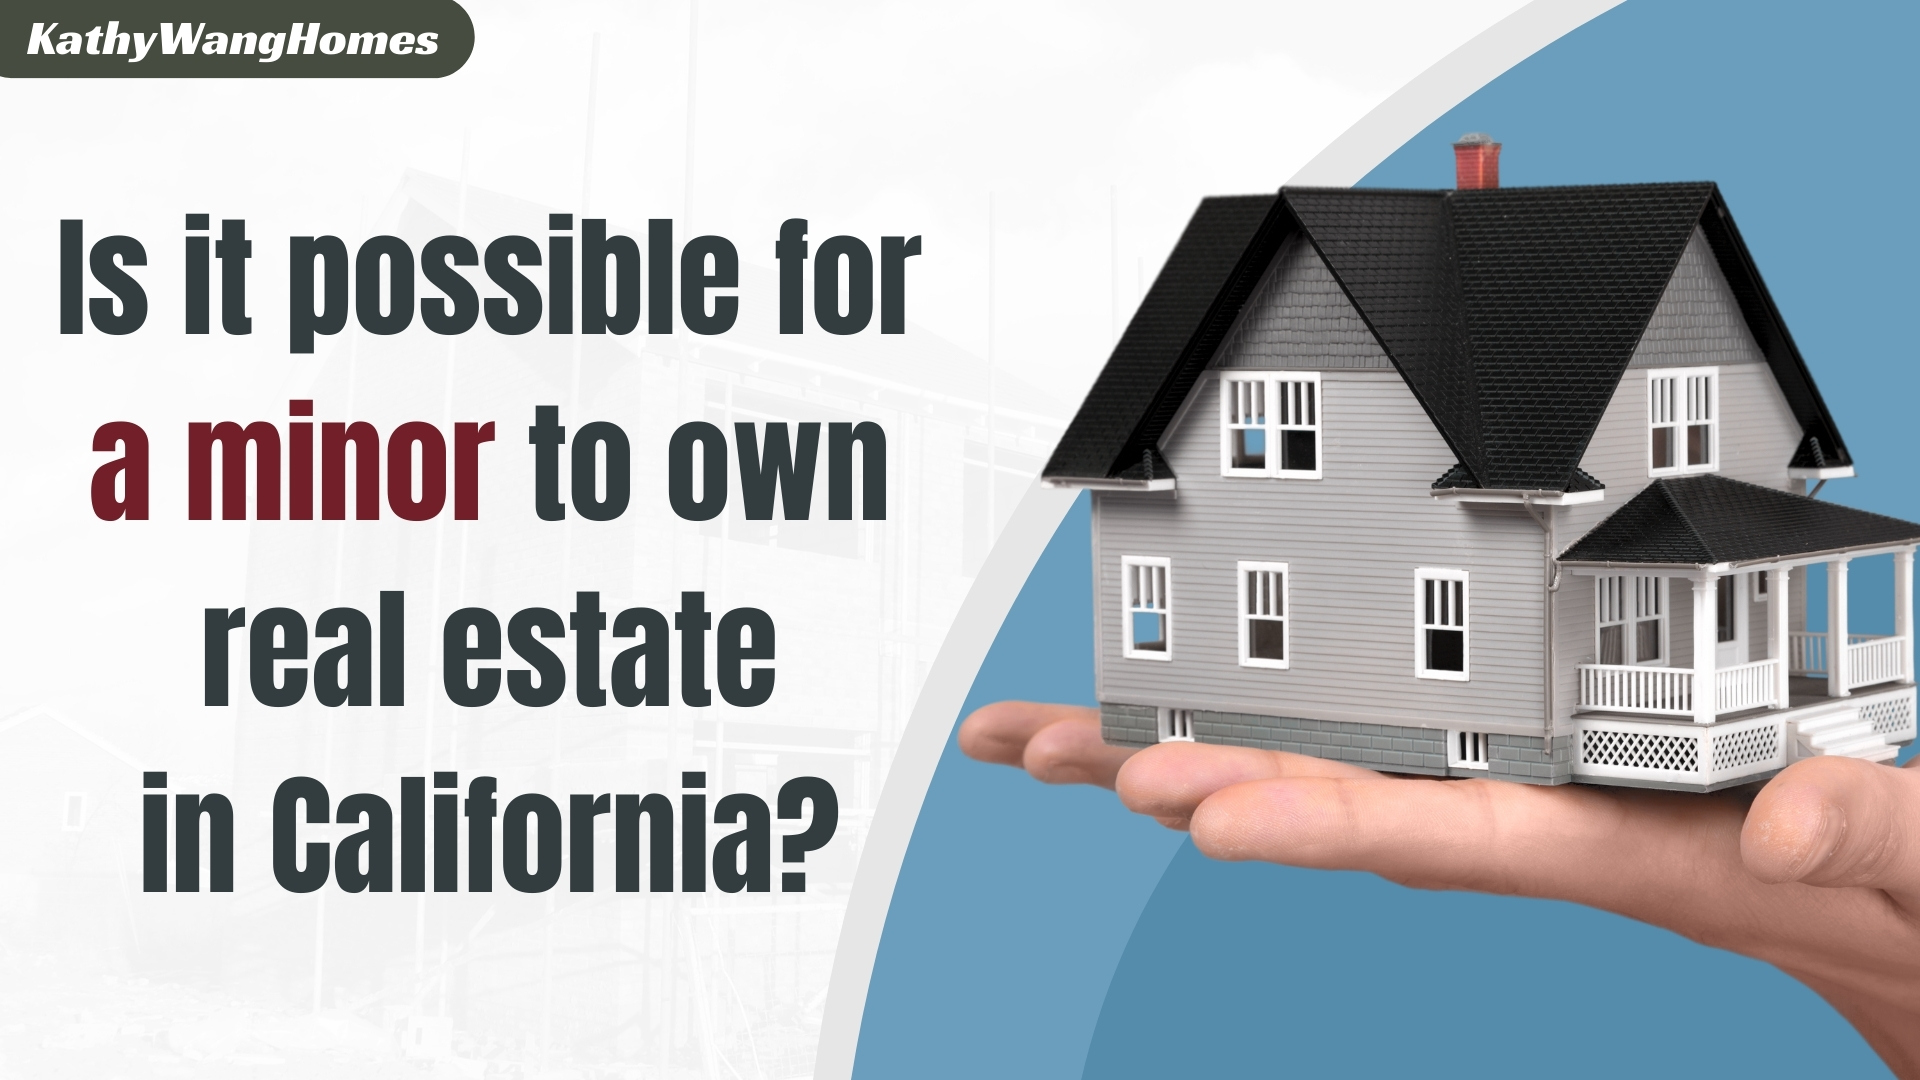 Is it possible for a minor to own real estate in California?